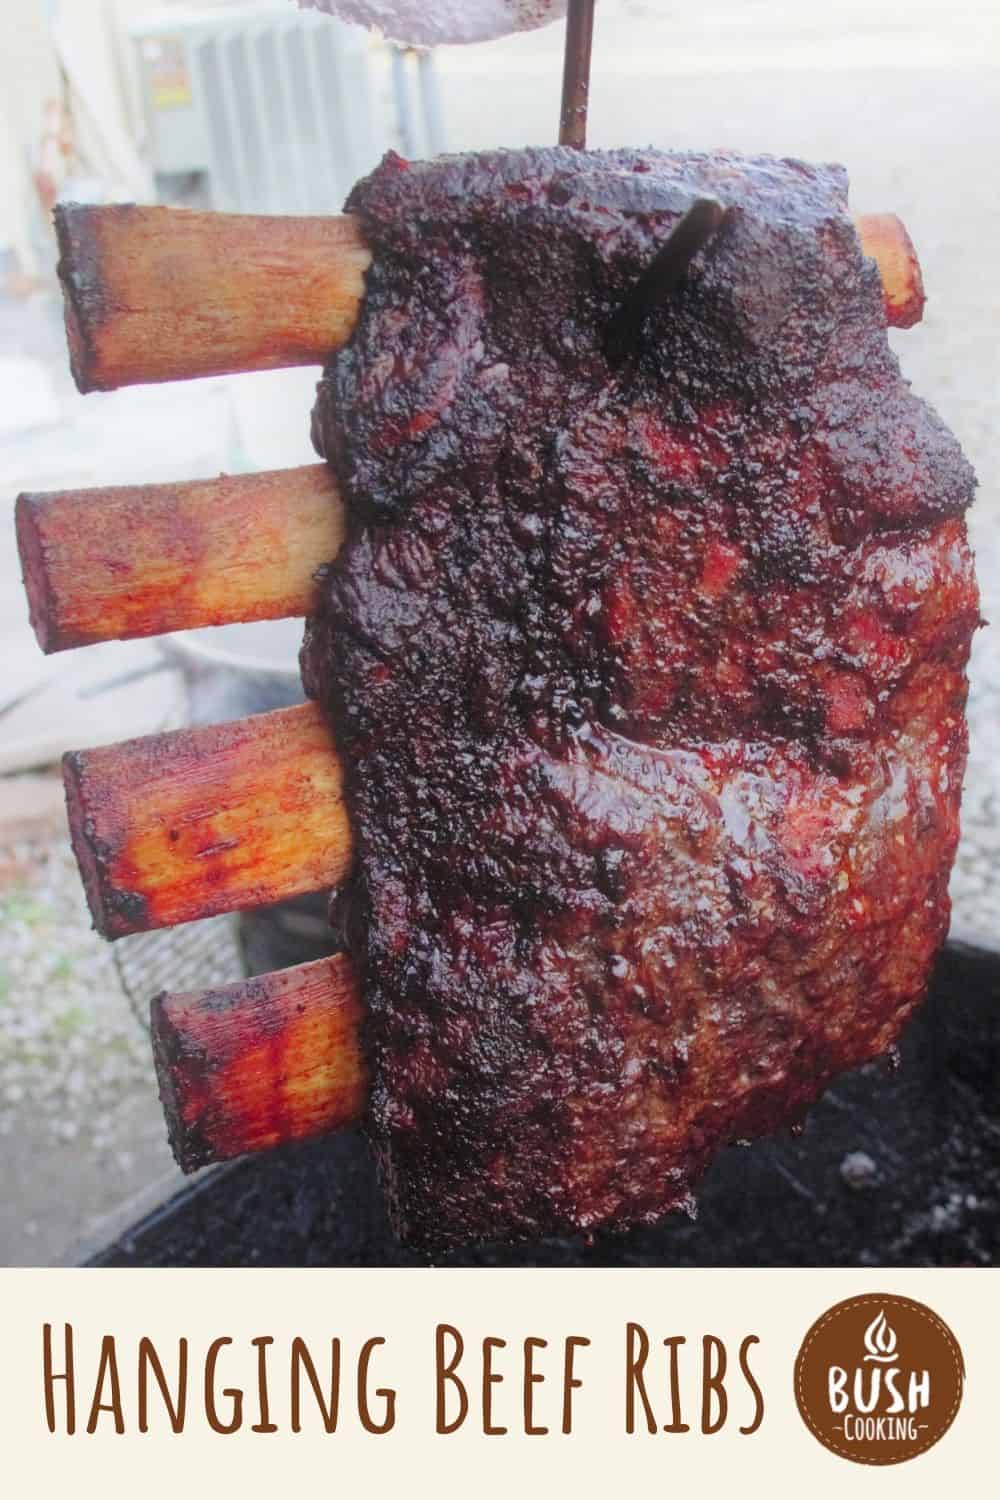 Ribs hanging on [homemade] meat hooks in my PitBoss. Couldn't find